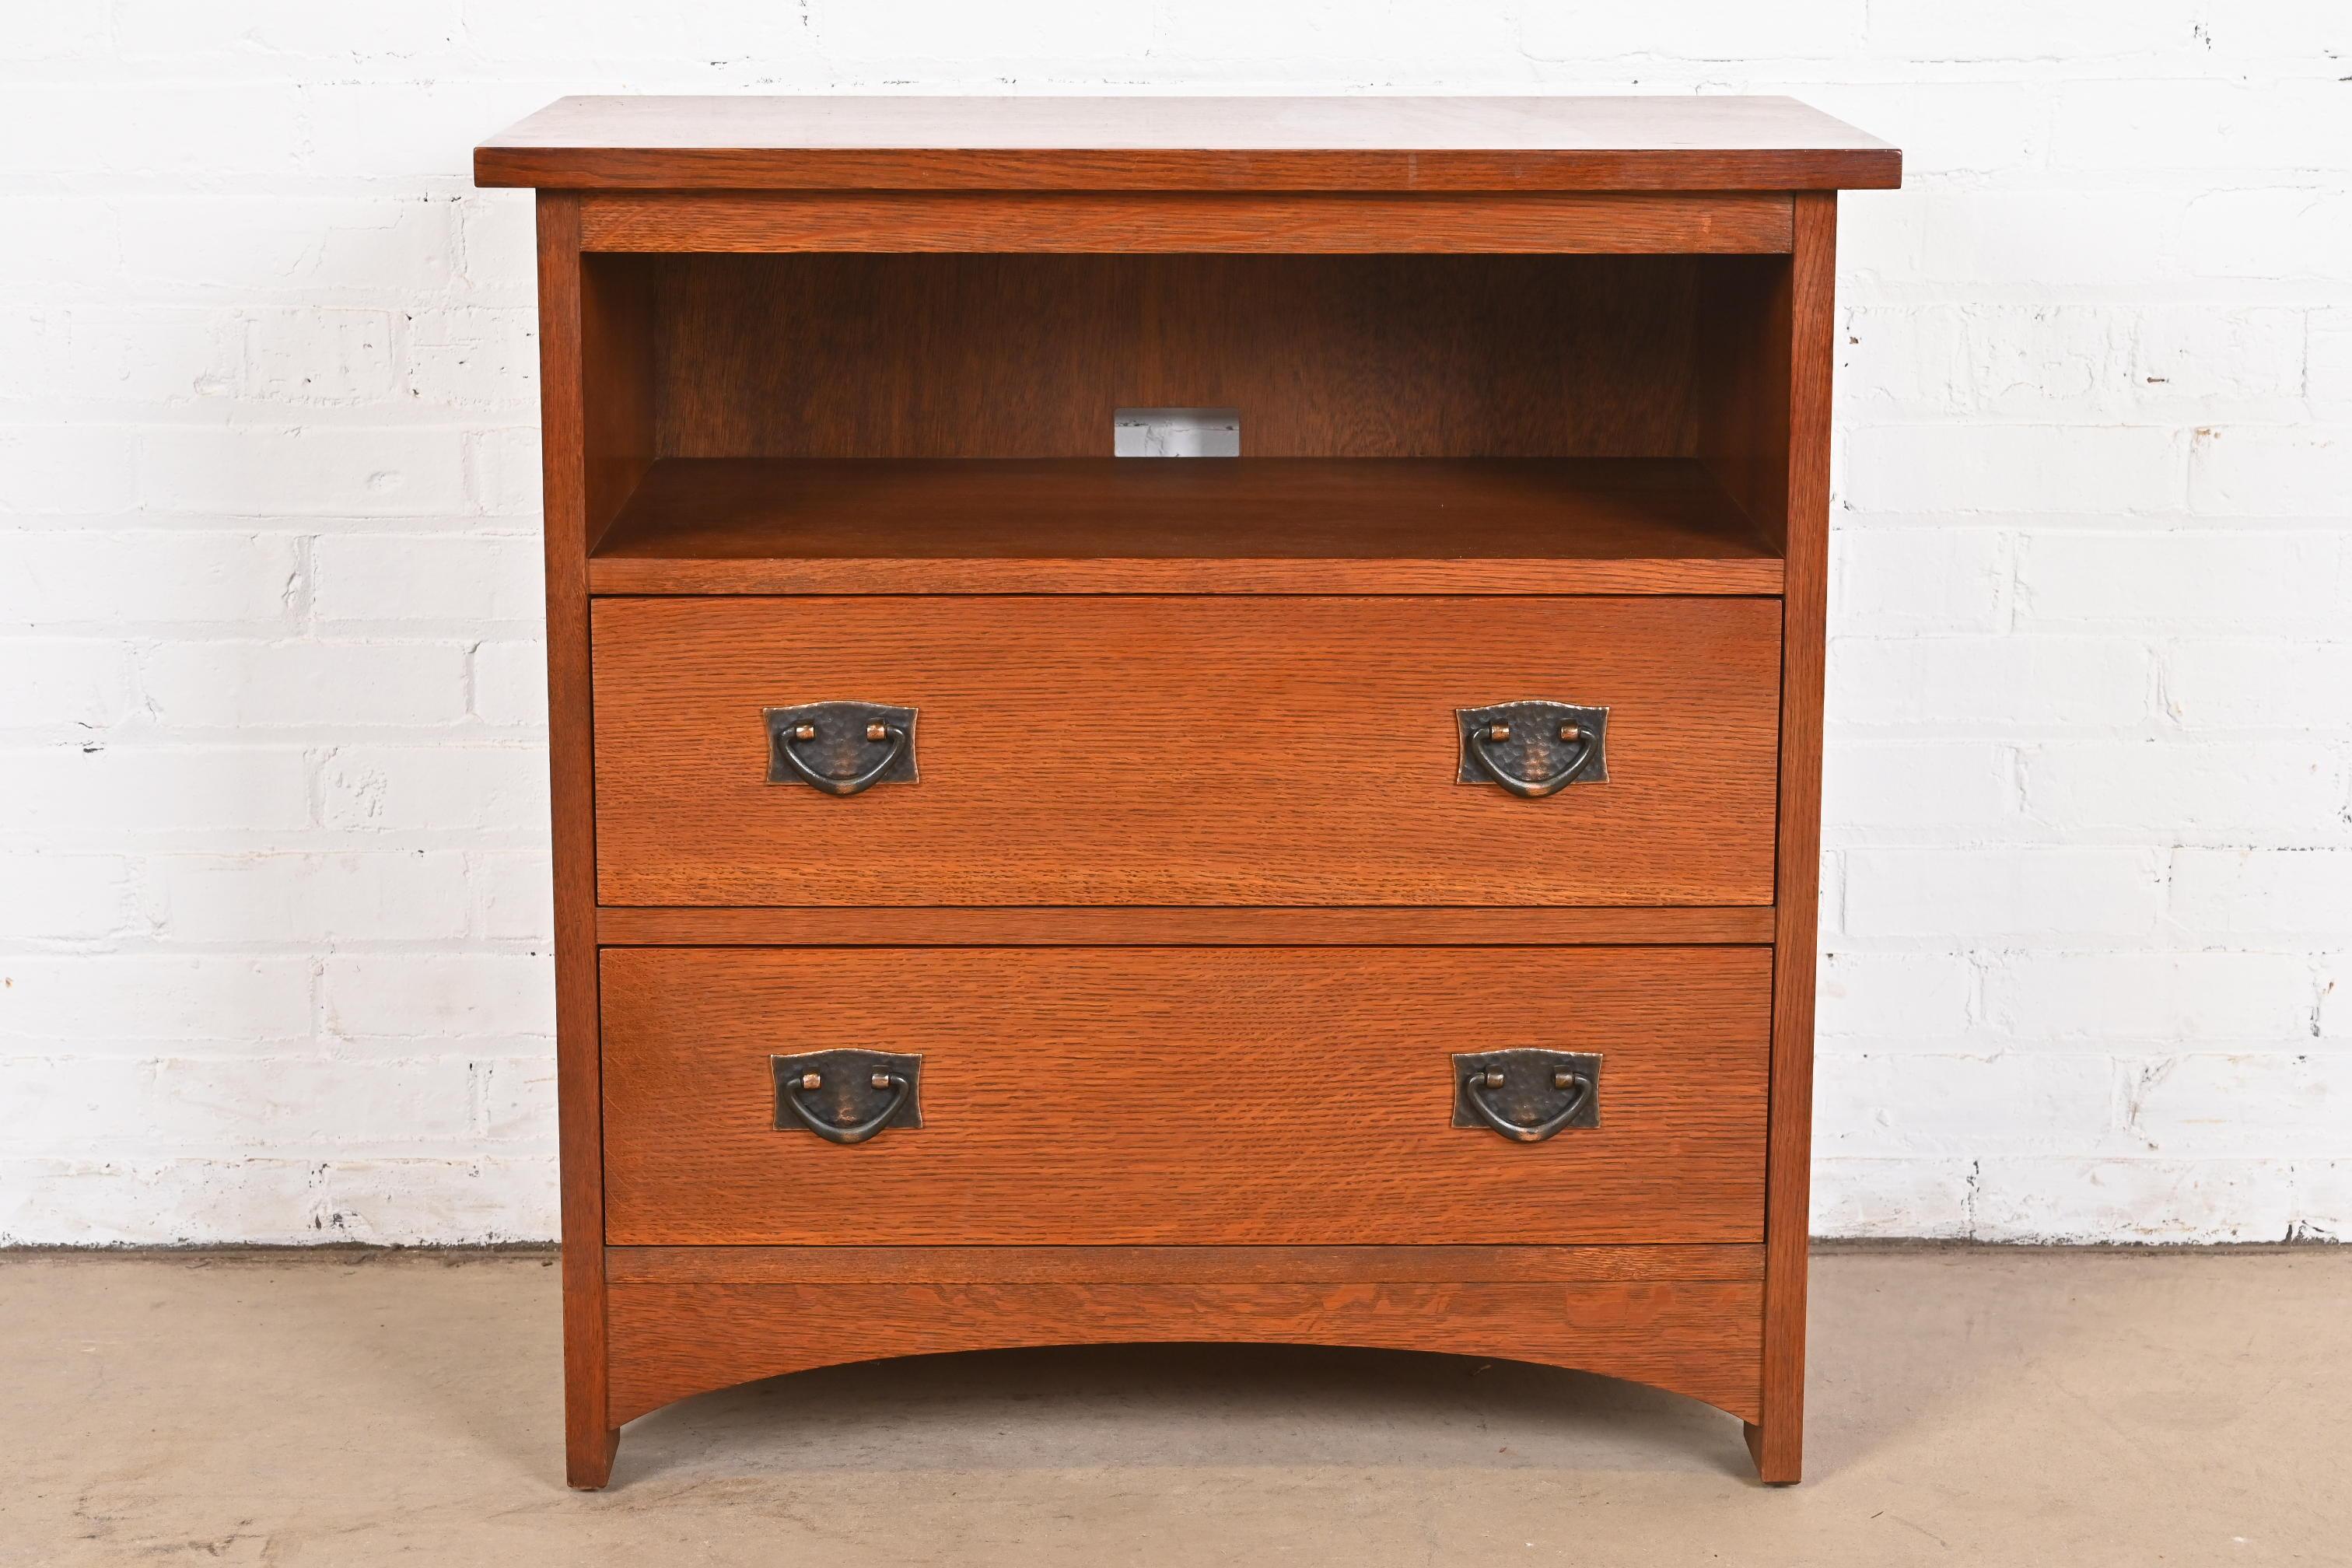 L. & J.G. Stickley Mission Oak Arts & Crafts Media Cabinet or Bedside Chest In Good Condition For Sale In South Bend, IN